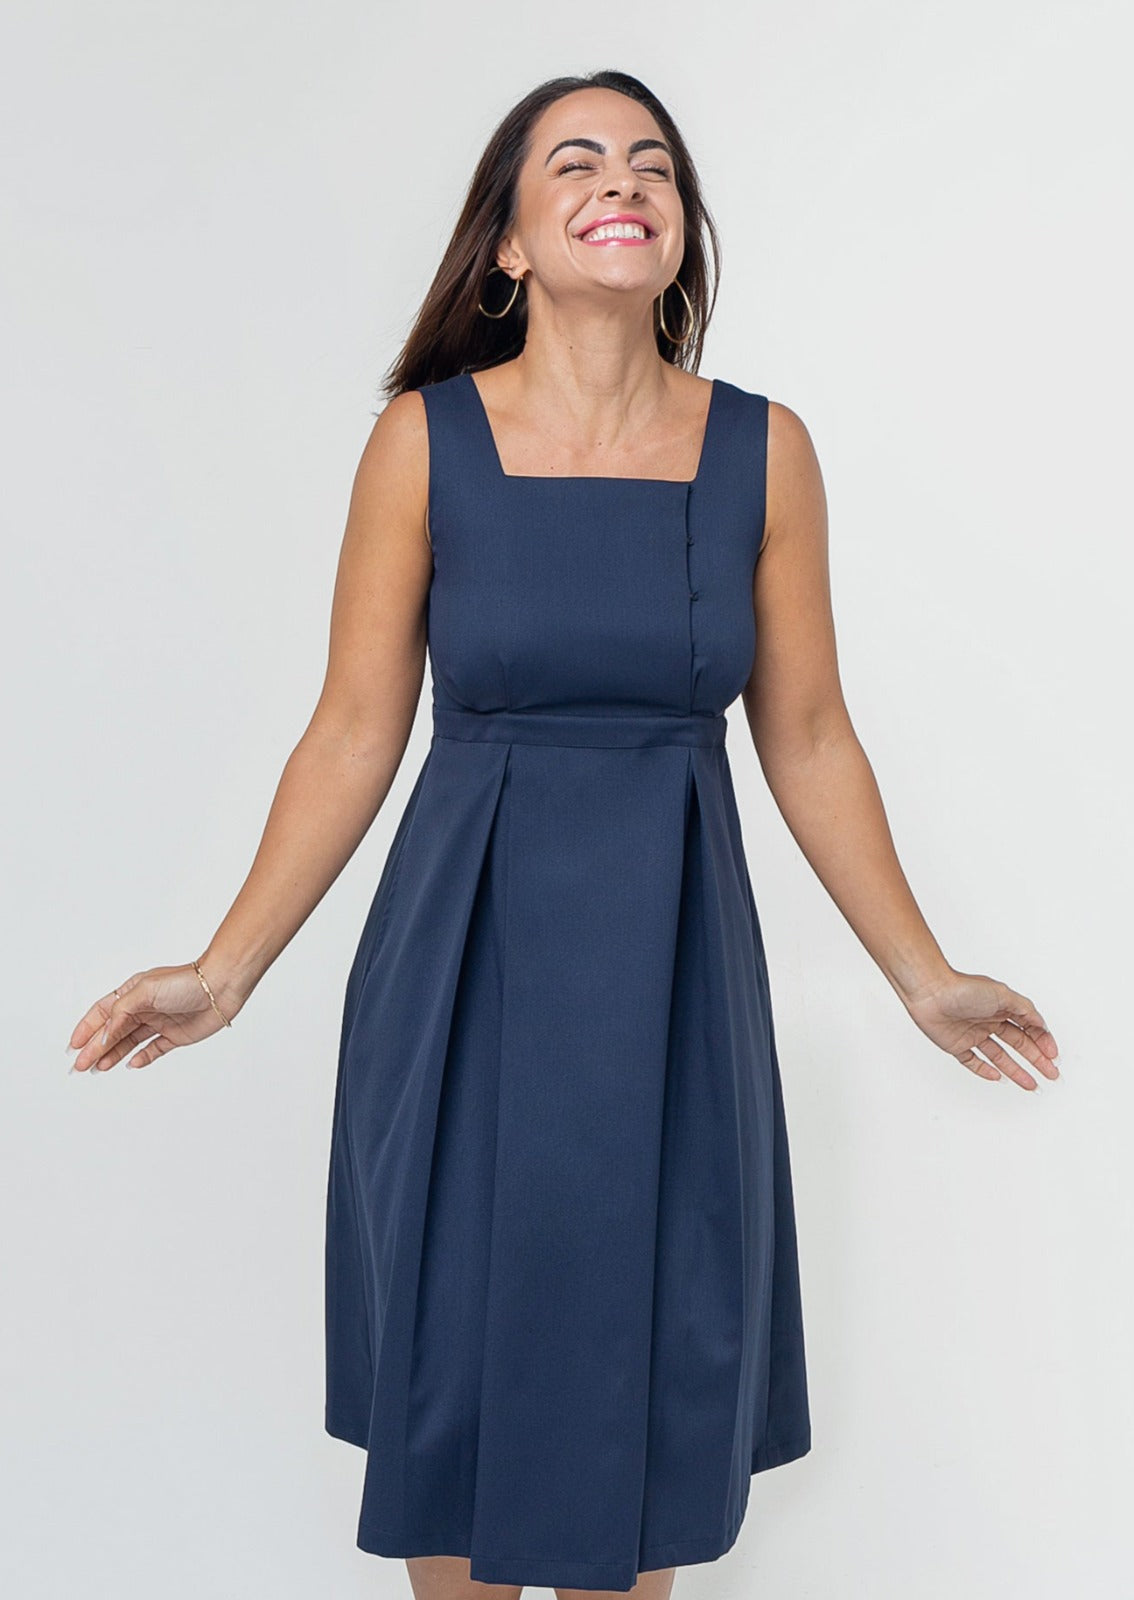 Luxury blue maternity dress, from MARION's collection of luxe maternity and nursing dresses. Sustainable, washable Italian fabric, available in standard and petite maternity sizes. Features designer breastfeeding access. Perfect maternity wedding guest dress, baby shower dress, or maternity tea party dress.